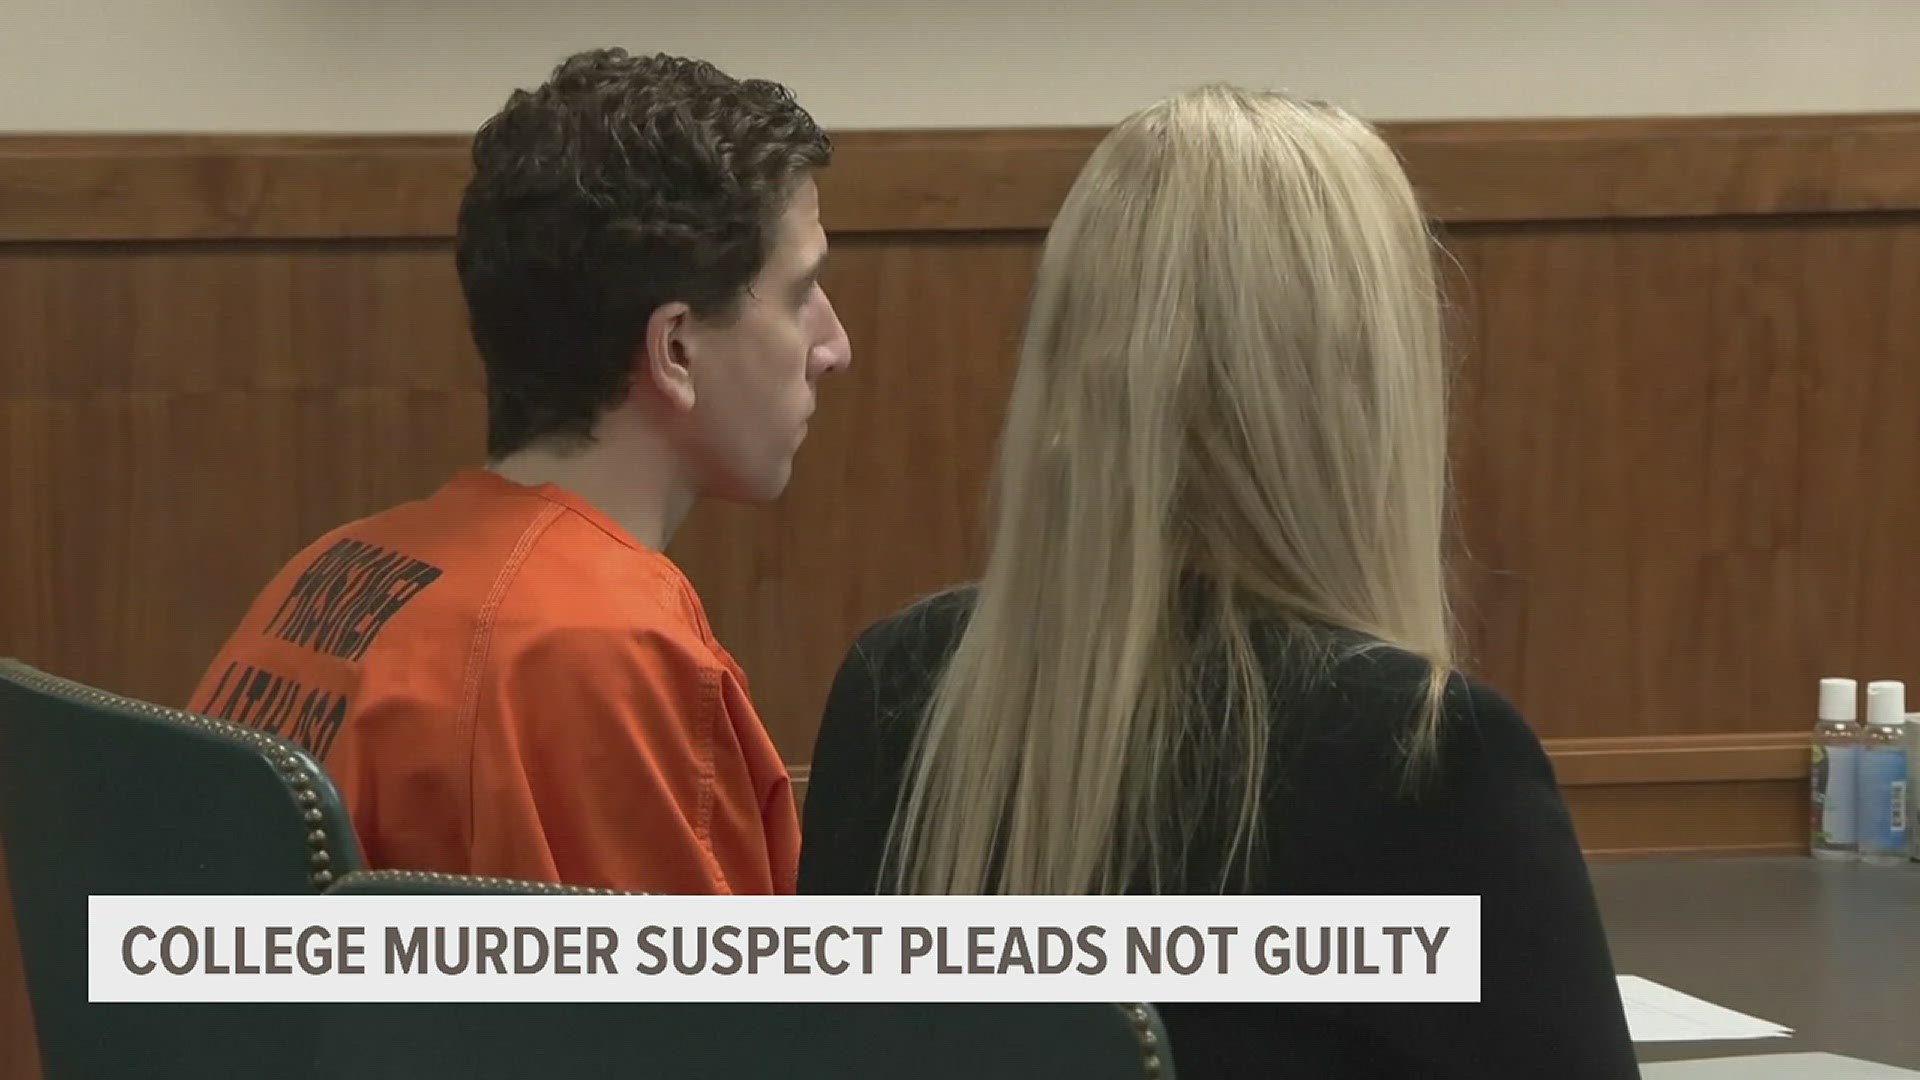 Bryan Kohberger declined to enter pleas for the murder and burglary charges, with his defense attorney telling the judge that they were going to “stand silent."